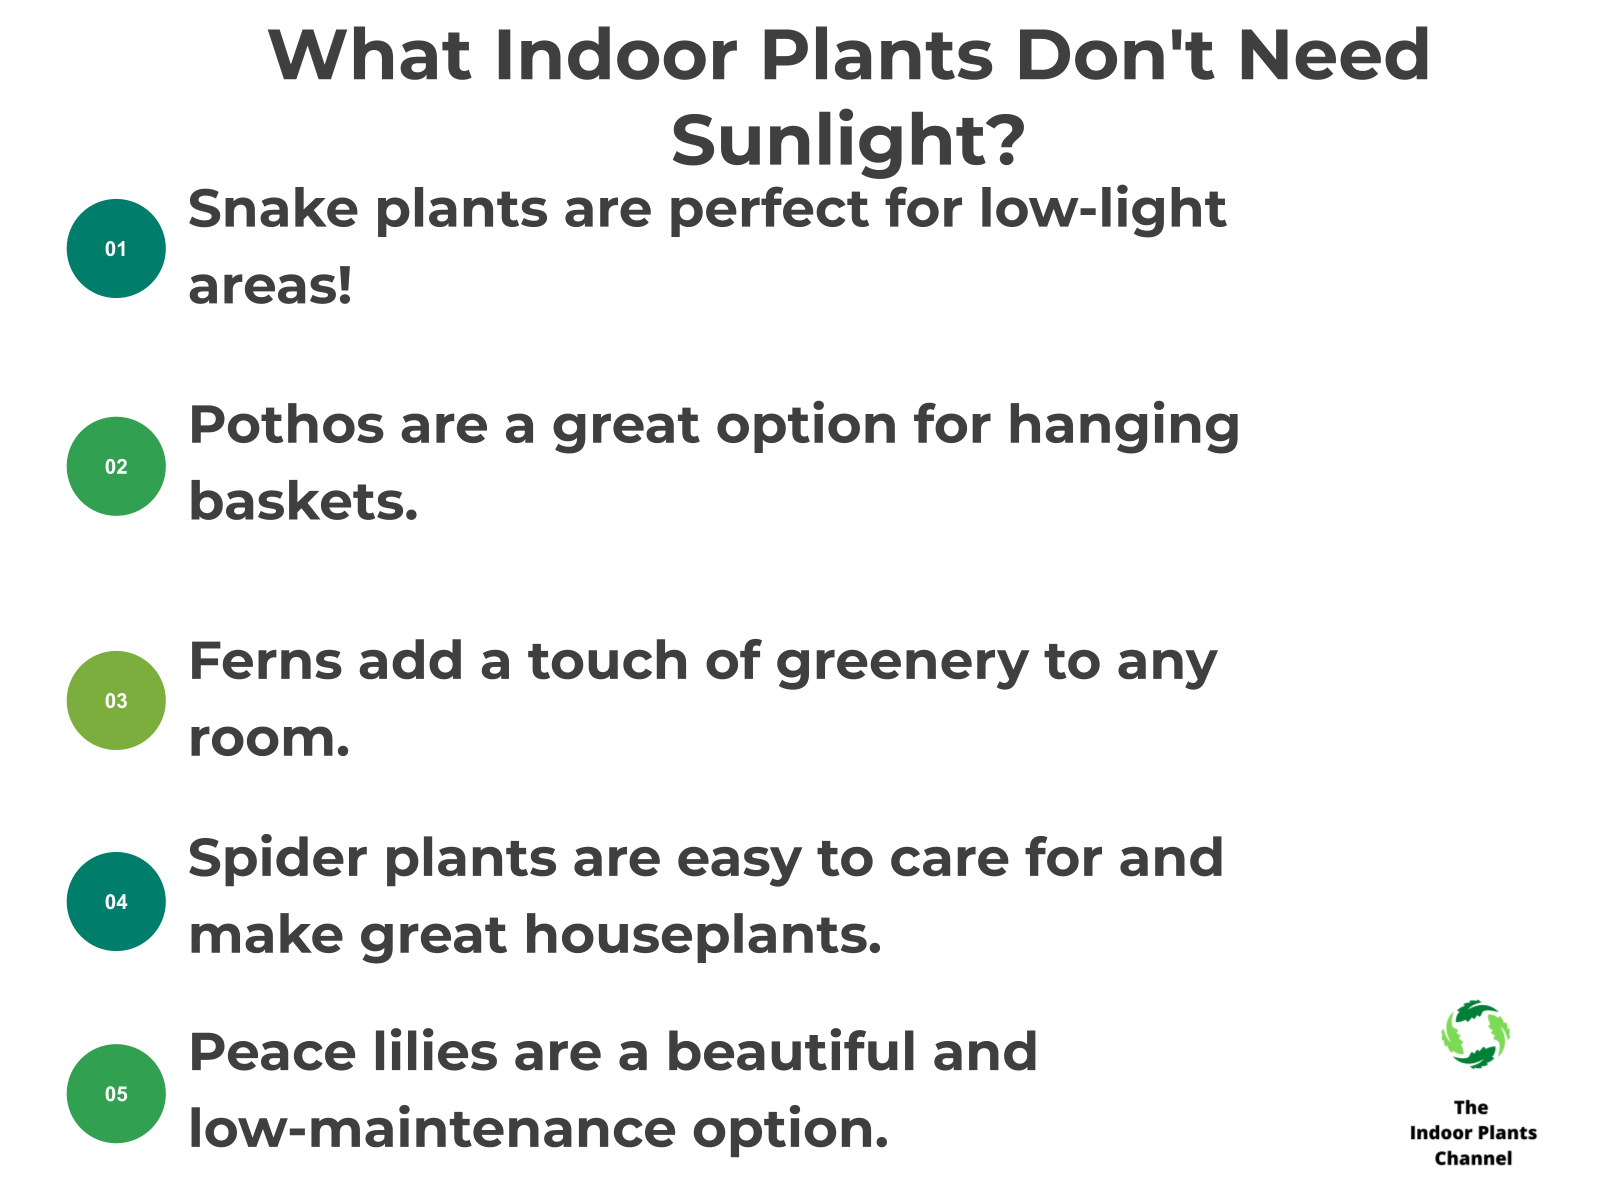 INFOGRAPHIC: What Indoor Plants Don’t Need Sunlight? 5 Perfect Picks!